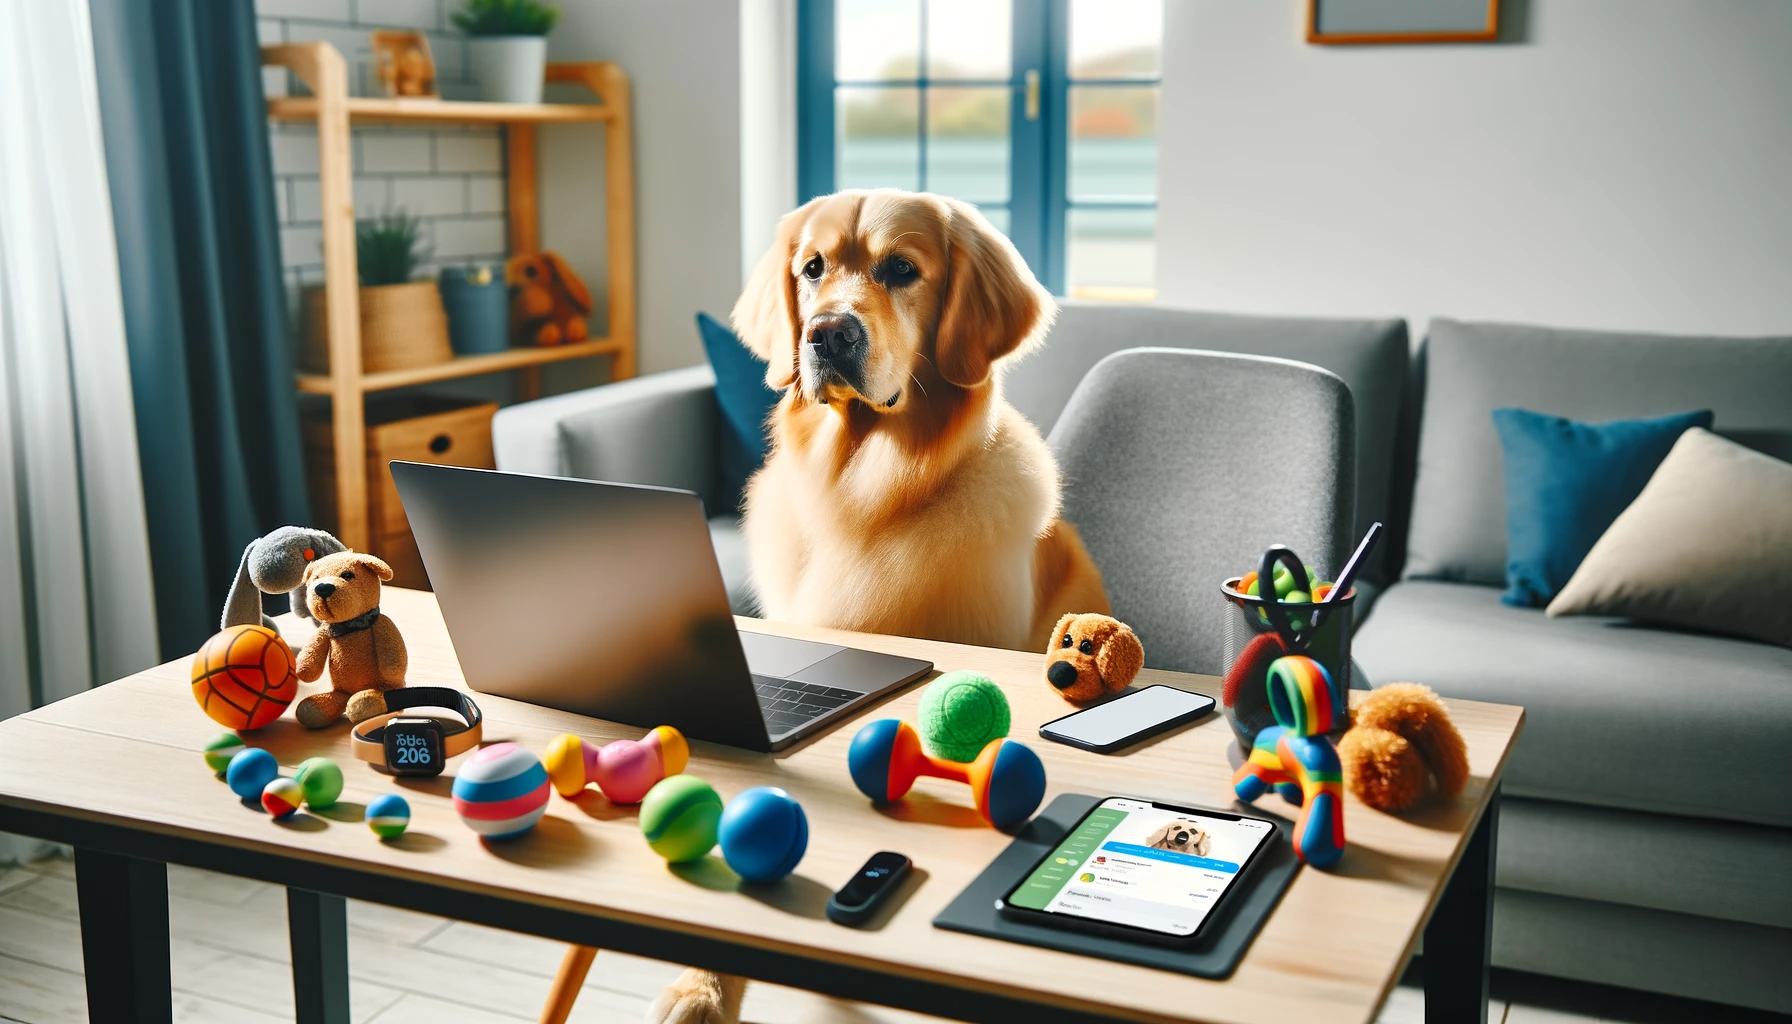 A Goldador sitting at a desk, surrounded by dog toys, a laptop, and a fitness tracker, looking like it’s got its life more sorted than most of us